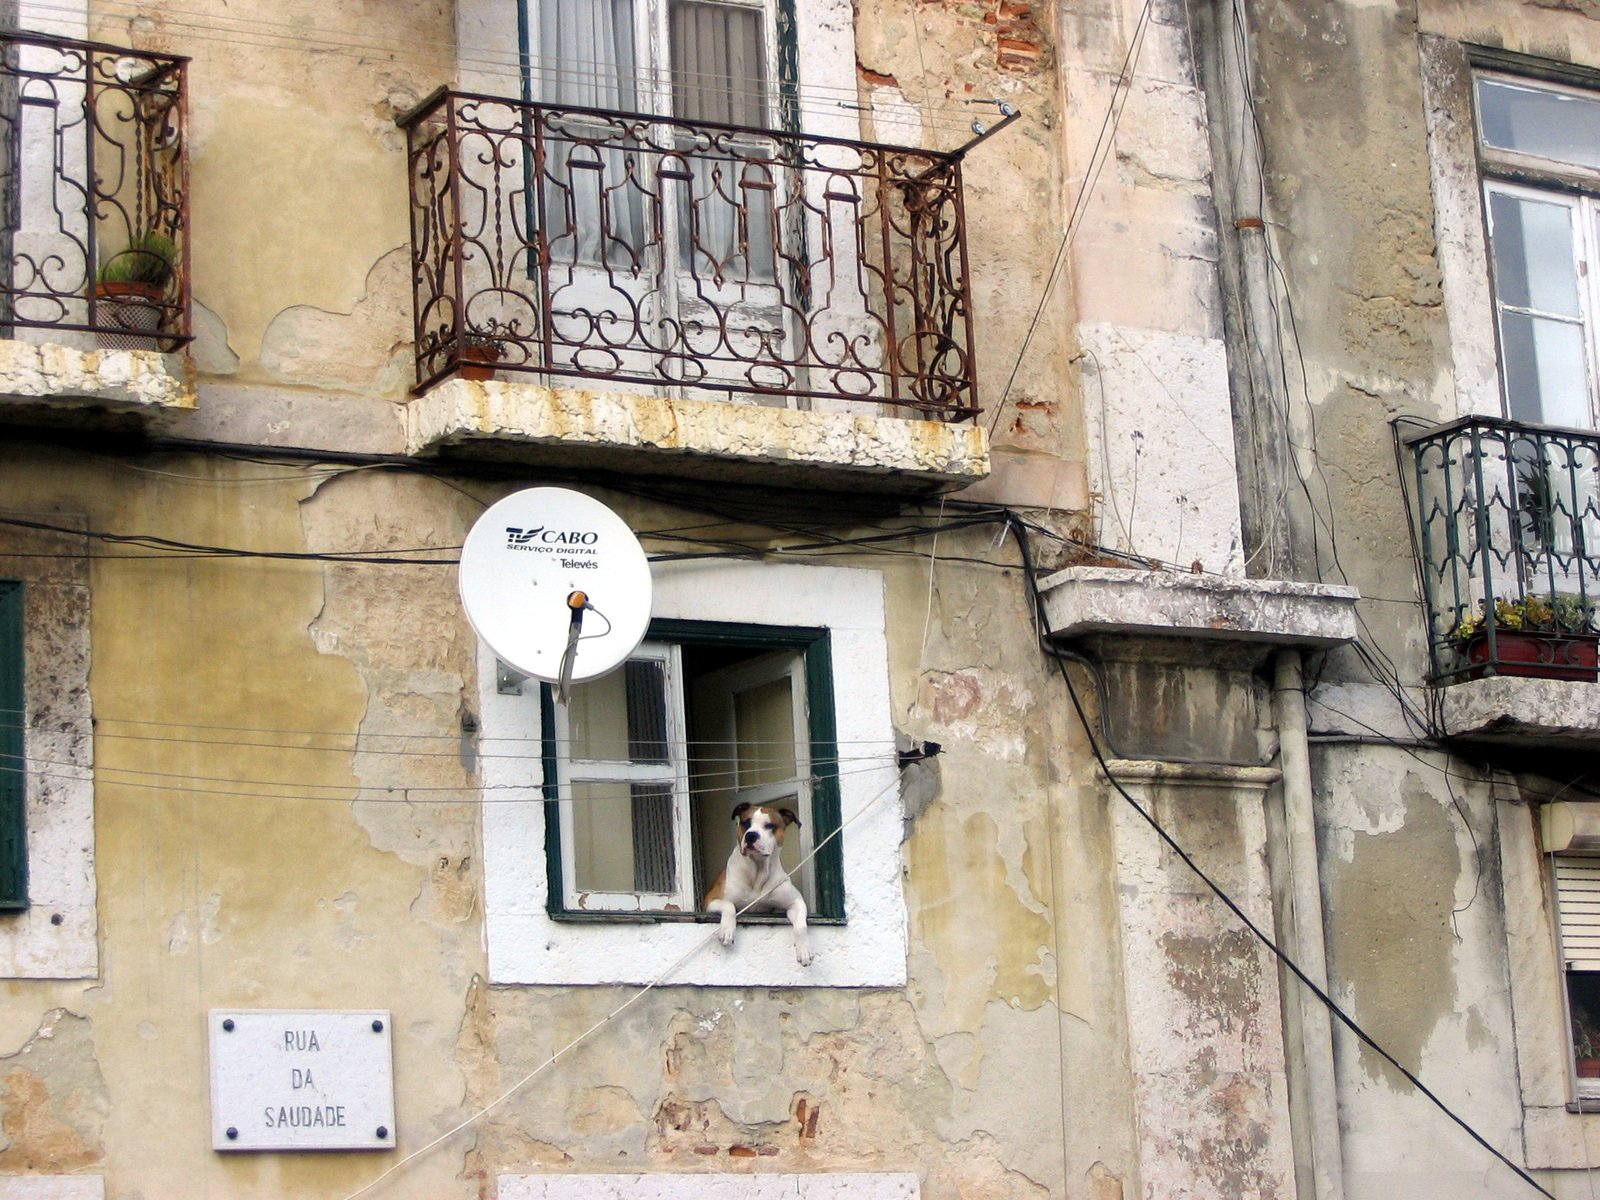 two dogs looking out an open window from inside the building